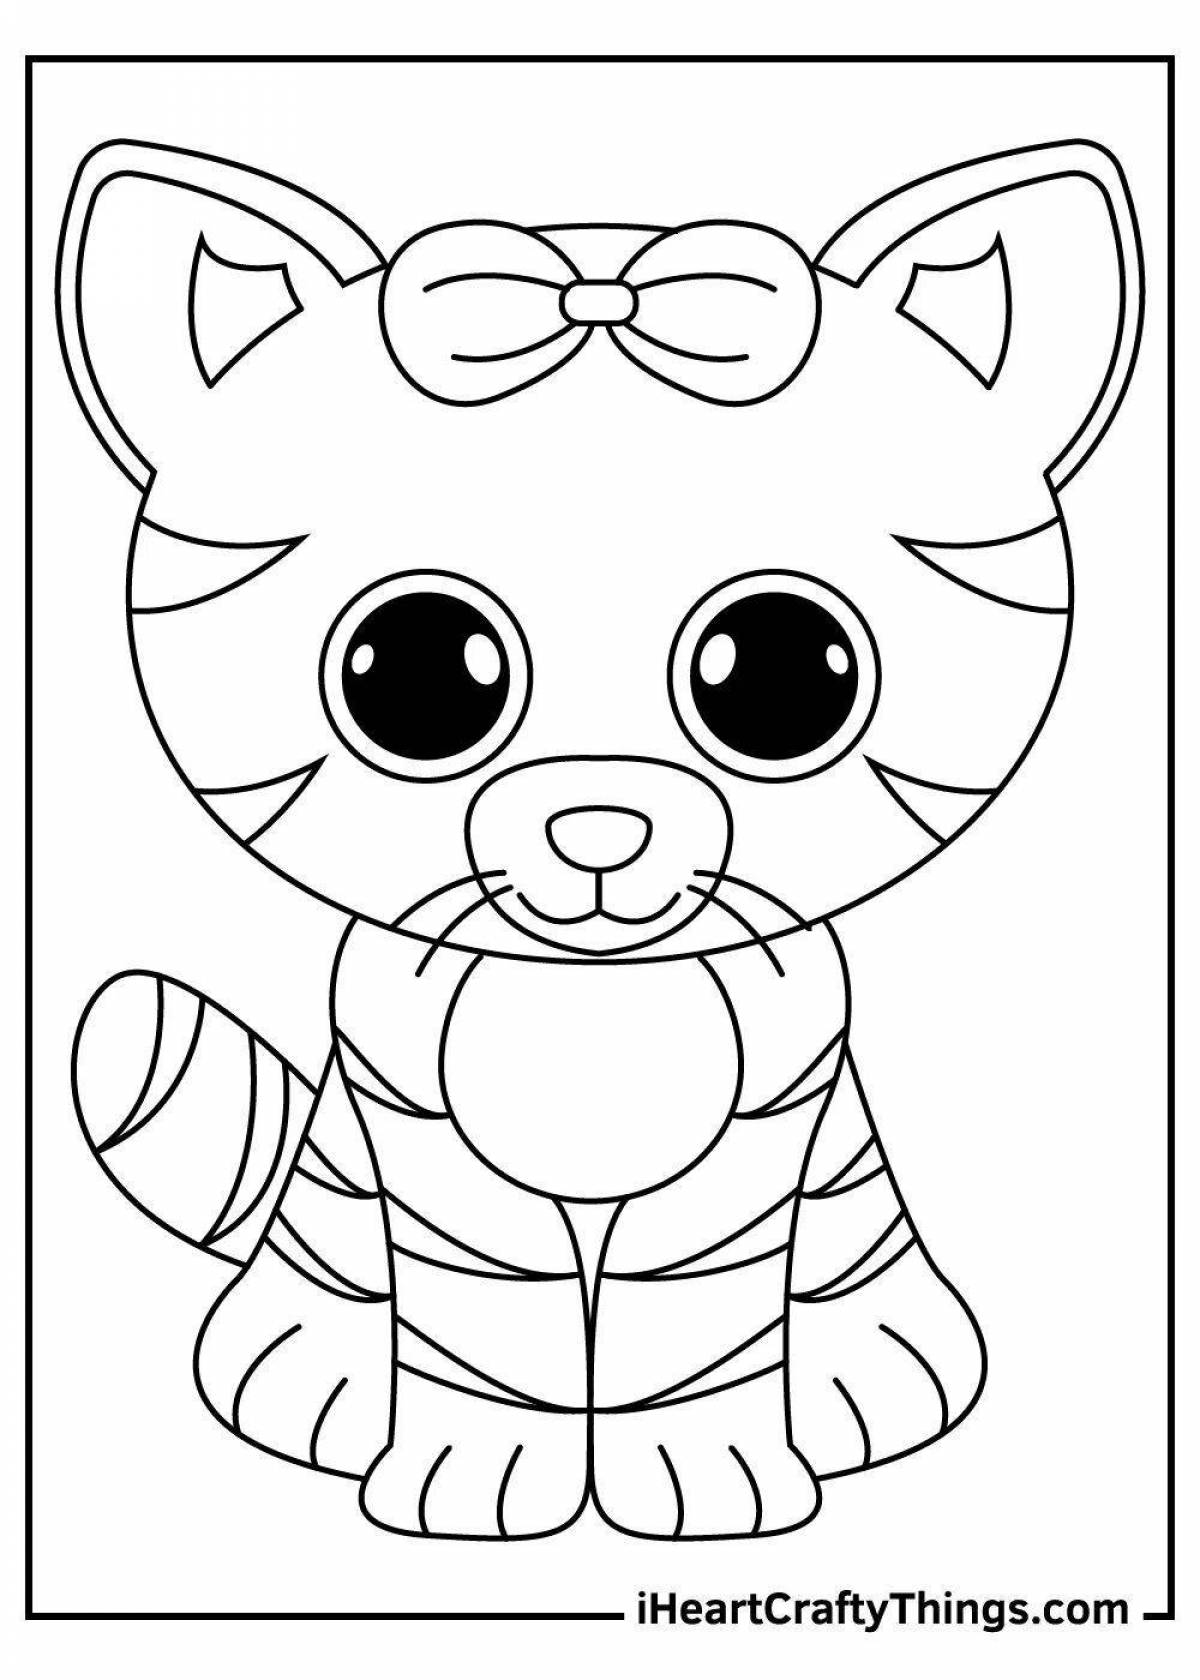 Color-explosion boxy boo coloring page for kids